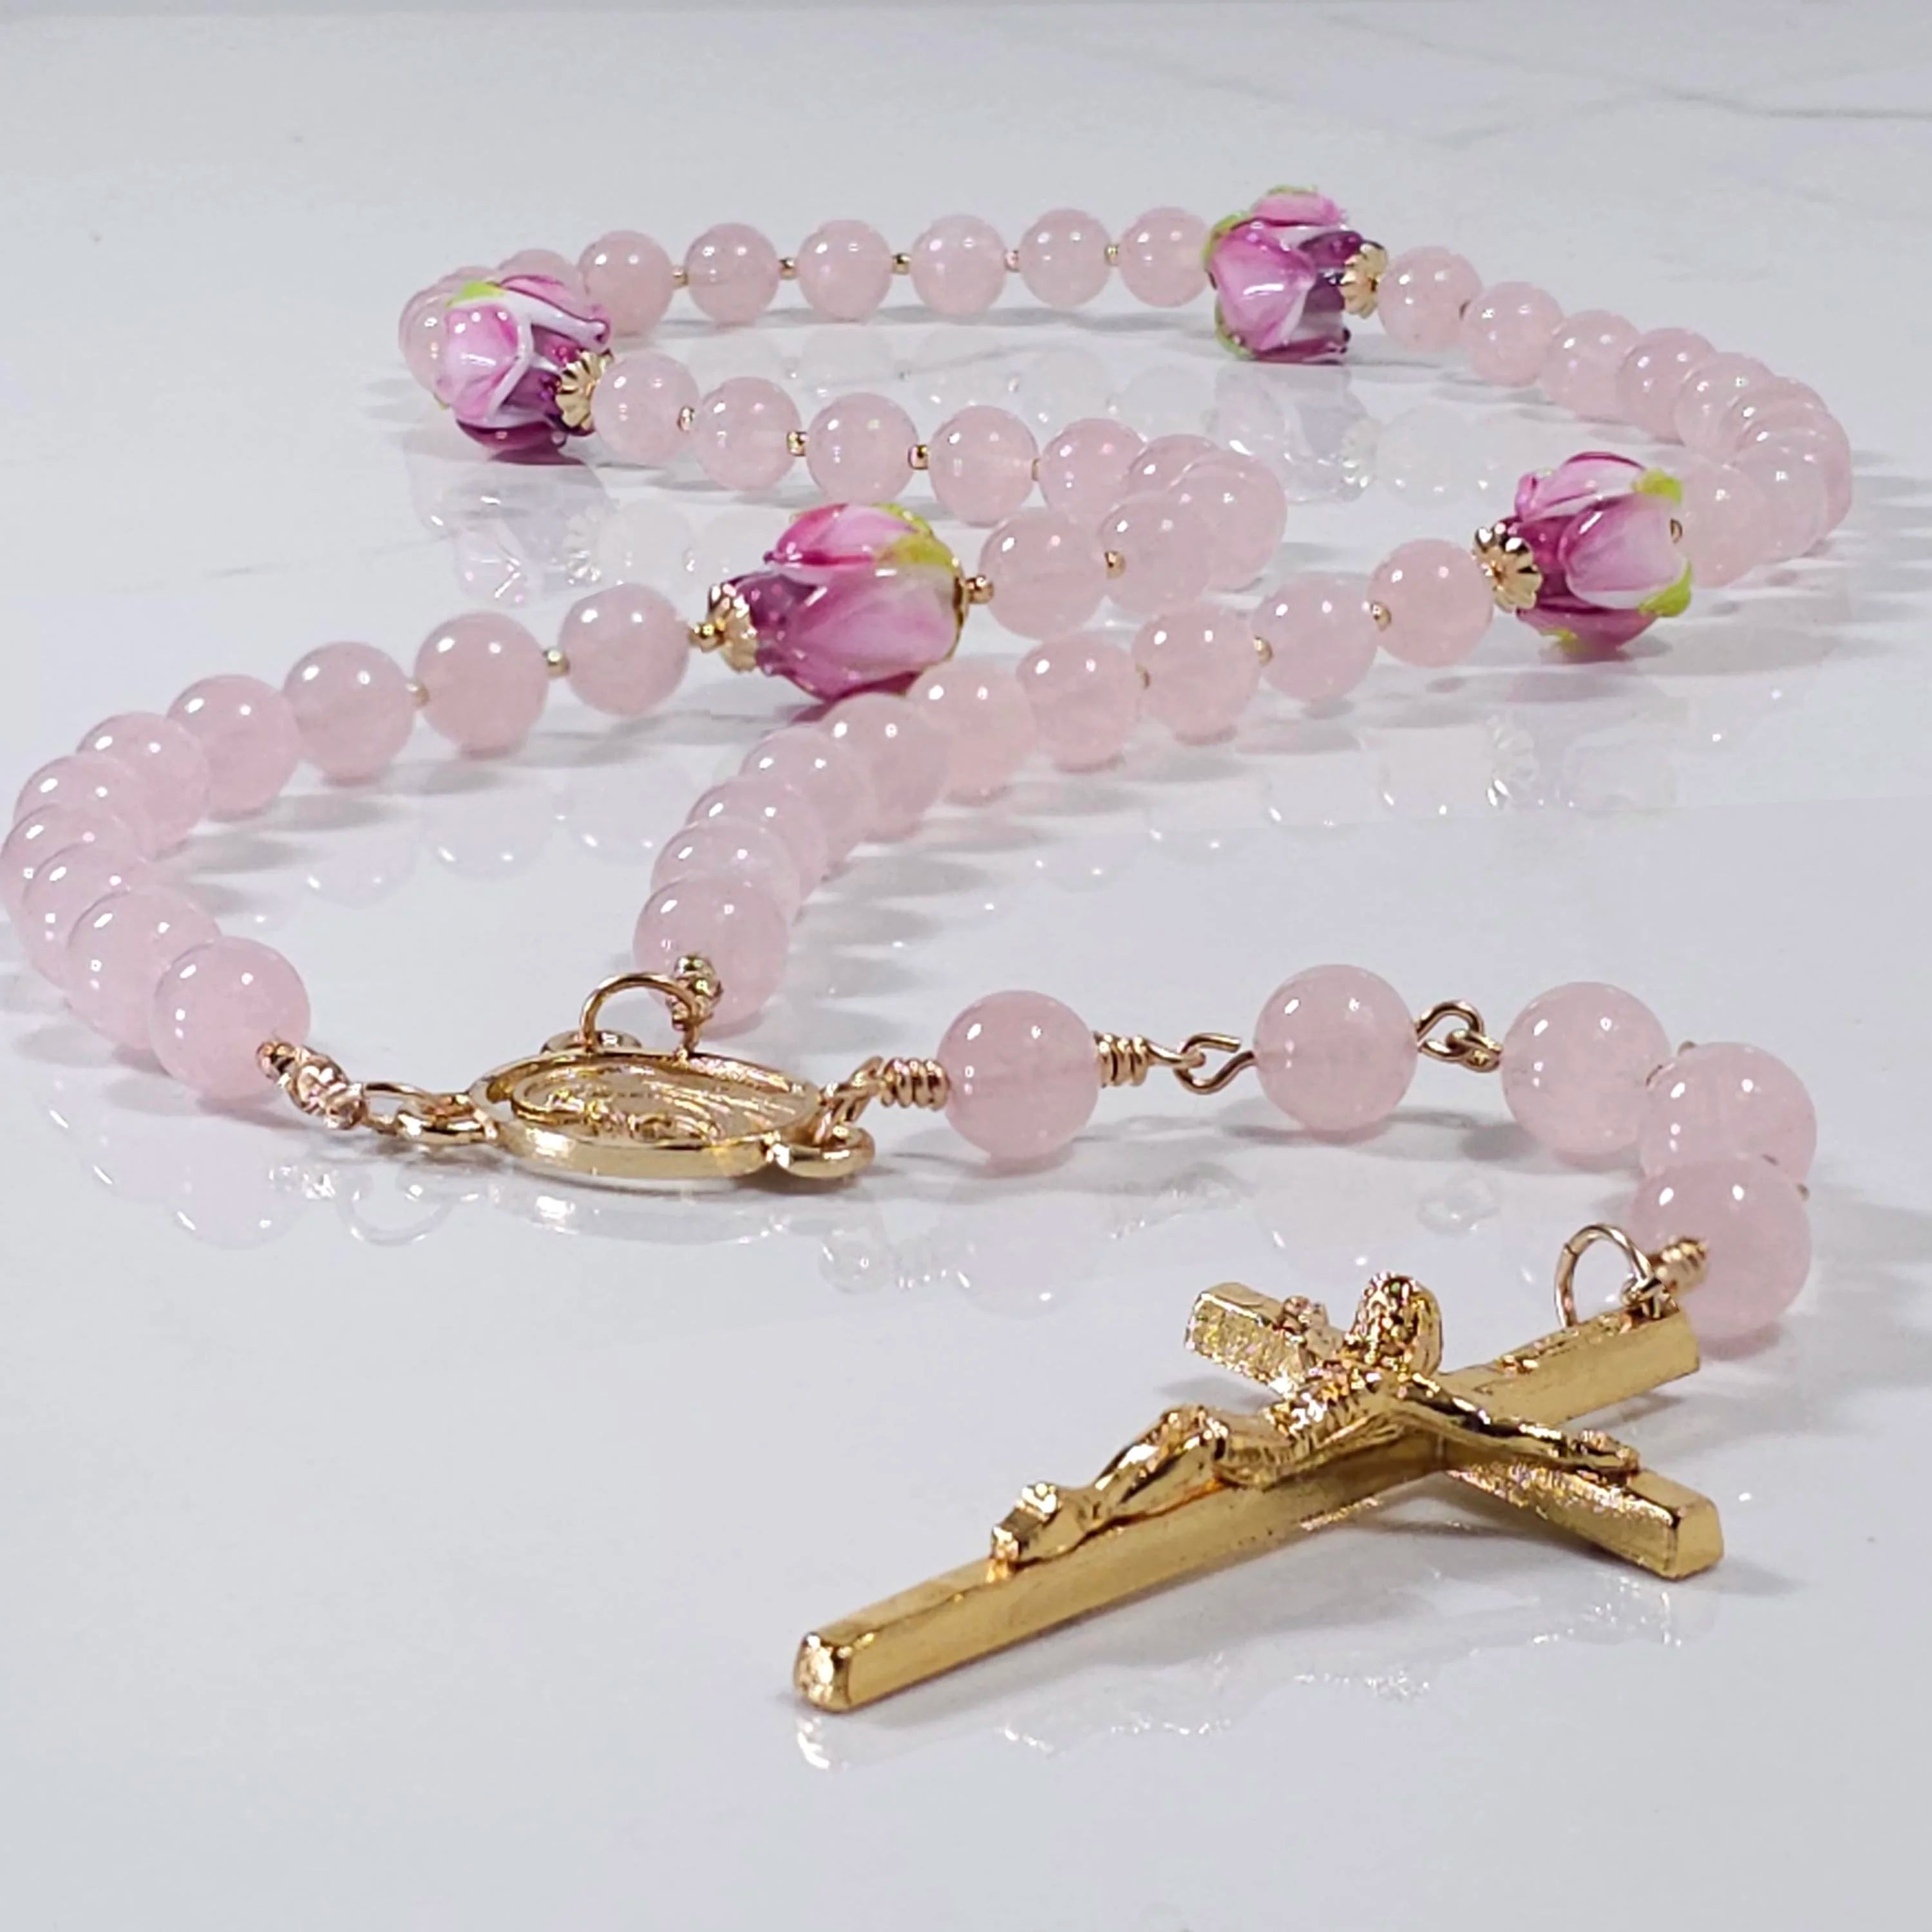 Divine rose rosary  made from rose quarts and italian pink flower. inspired by mother Mary as the divine rose.